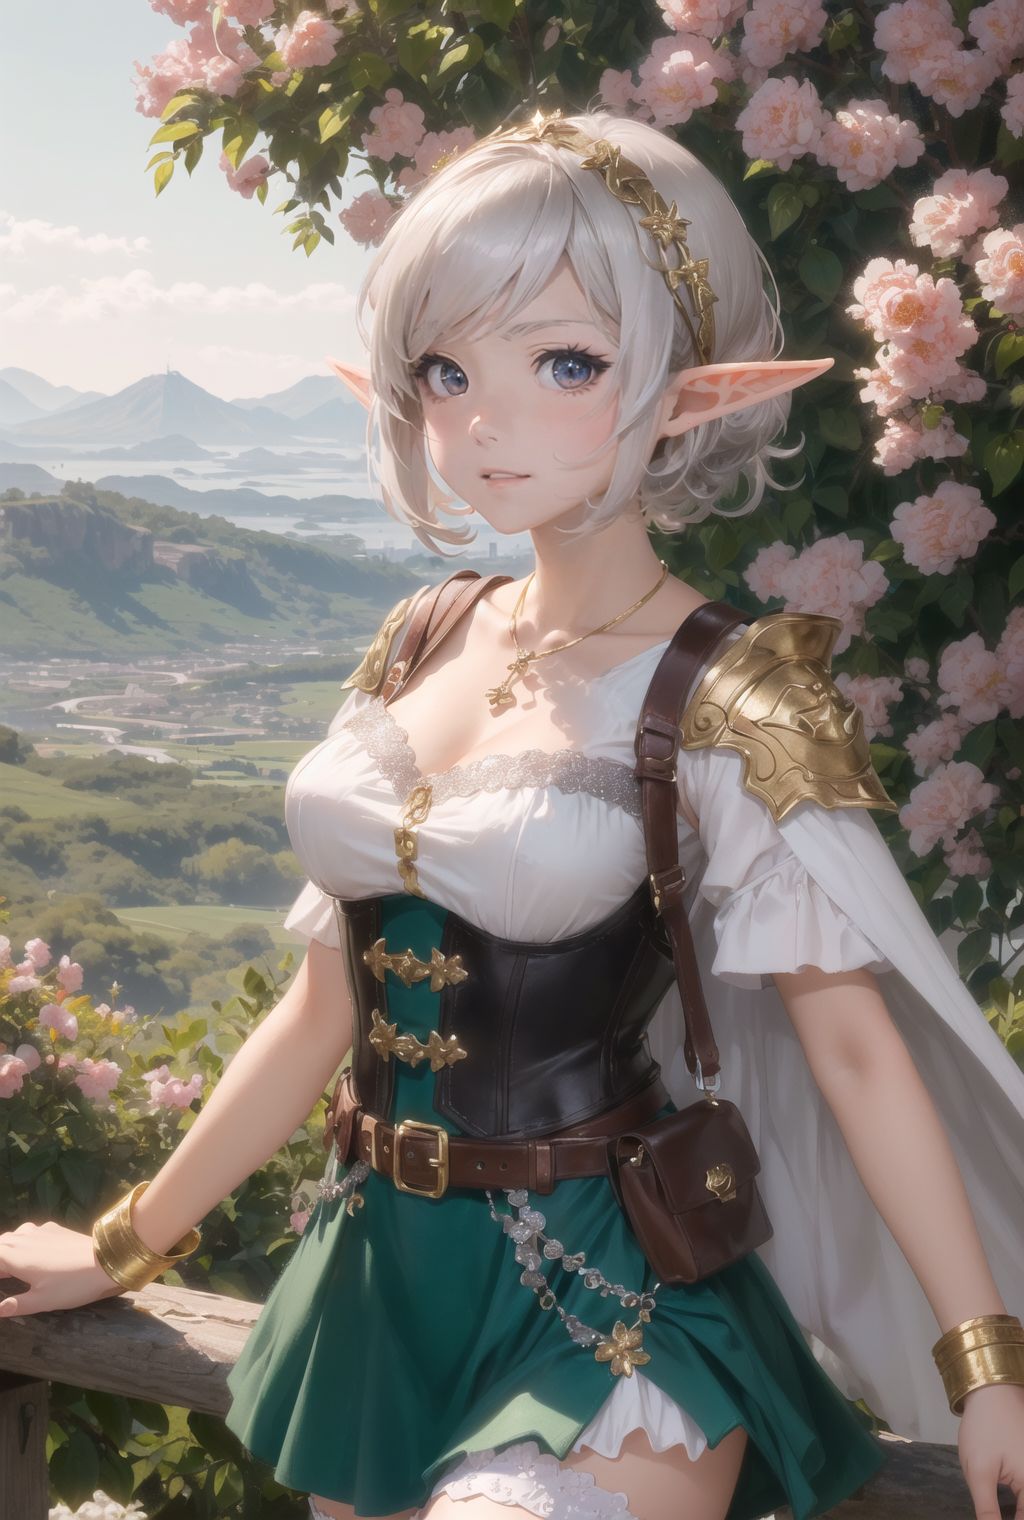 (Come on, let's paint this charming 16-year-old elf girl in detail! Represent her with more charm than flowers around her, and dedicate your time and effort to her:1.9),
She smiles, raising corners of her mouth and showing a few front teeth, with pouty lips and slightly drooping eyes epitomizing cuteness.
She is attractive 16-year-old elf warrior girl in japanese anime style, standing on mountaintop.

She stands bravely with long sword at her back.

The setting is a plain at the top of a mountain, with a wide white sea of clouds in the background.
The rising sun, tinged with the purple tones of dawn and the soft light tones of the morning sun, illuminates creating a narrative impression
Her expression is one of determination and courage, with silver hair and elven features contrasting with the dark, ominous surroundings.

She is poised and graceful in her luxurious armor, which gleams in twilight.
(She has idol-like kawaii face:1.5), with dark green eyes, and (silver hair in a stylish short cut with a delicate flow:1.6),
She wears silver hairpiece, green blouse with ruffled neckline, brown corset top with gold cross-stitching, dark brown underbust corset with gold buckles, emerald green cape with gold brooch shoulder clasp, leaf-shaped shoulder straps with gold trim, green fabric wrist cuffs, a forest green multi-layered skirt with gold trim, leather utility belt with a pouch, brown folding boots, and contrasting dark and light green accessories.
She also has a necklace, bracelet, and an intricate gold armband on her upper arm.

Her stance is powerful and brave, yet youthful and graceful, embodying ideal blend of innocence and glamour.
low angle emphasizes her cuteness and highlights the delicate textures of her hair and clothing.
Natural light casts soft shadows and highlights the youthful contours of her face, bringing her into sharp focus.
The shallow depth of field of the 50mm f/1.2 lens creates a beautiful depth-of-field blur that keeps her face in focus, with high-resolution, detailed graphics, vibrant colors, and professional quality.
Ultra-high resolution captures every detail, from individual strands of hair to the intricate fabric of her costume.
Professional clarity and contrast bring vibrant colors to life.